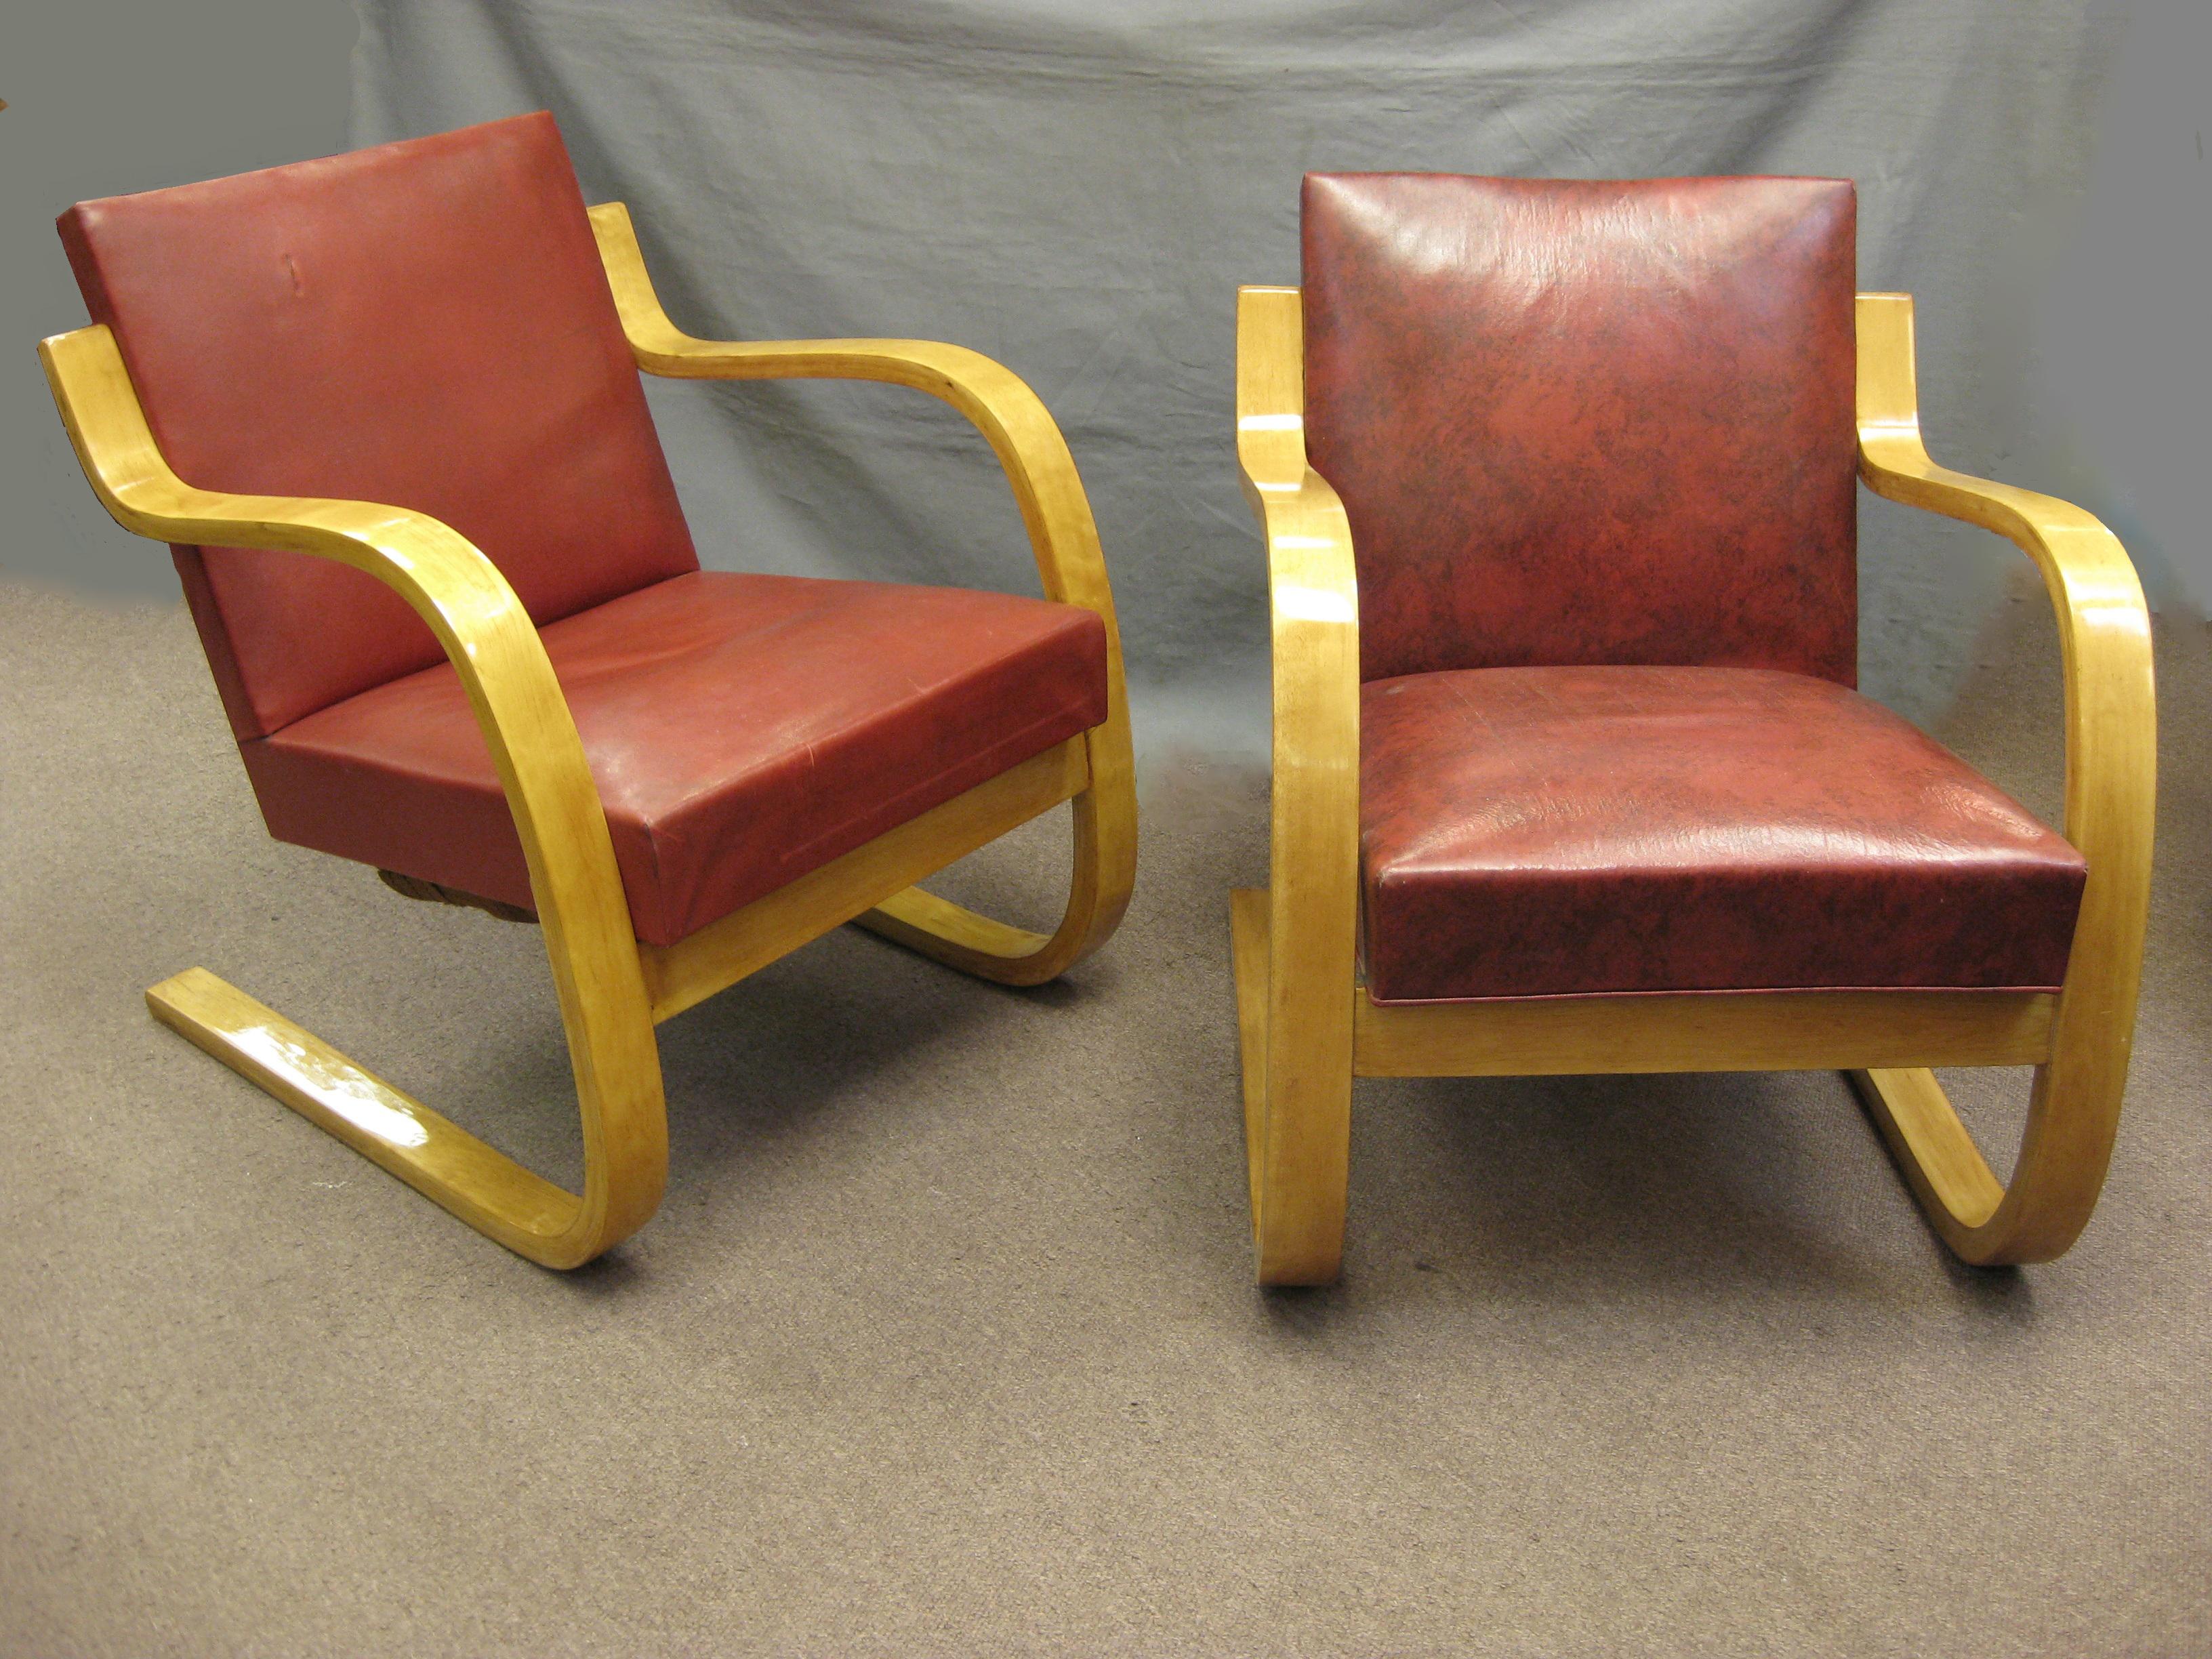 Pair of Early, Original 1930's Cantilever Chairs, Stamped Alvar Aalto 3